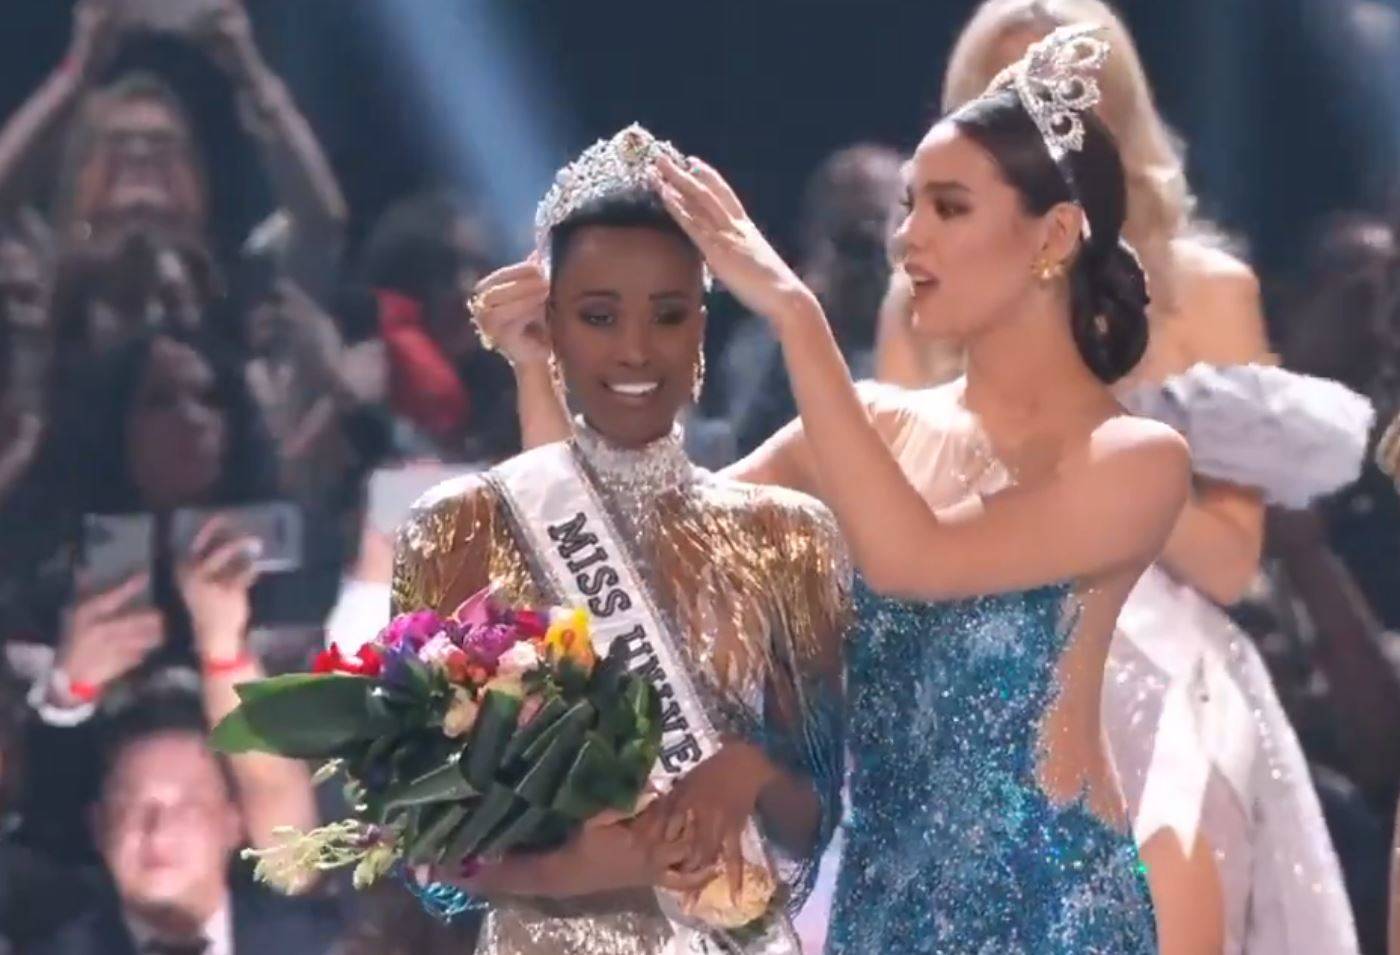 Miss Universe 2019 title shifts to Africa - Zozibini Tunzi of South Africa is Miss Universe 2019